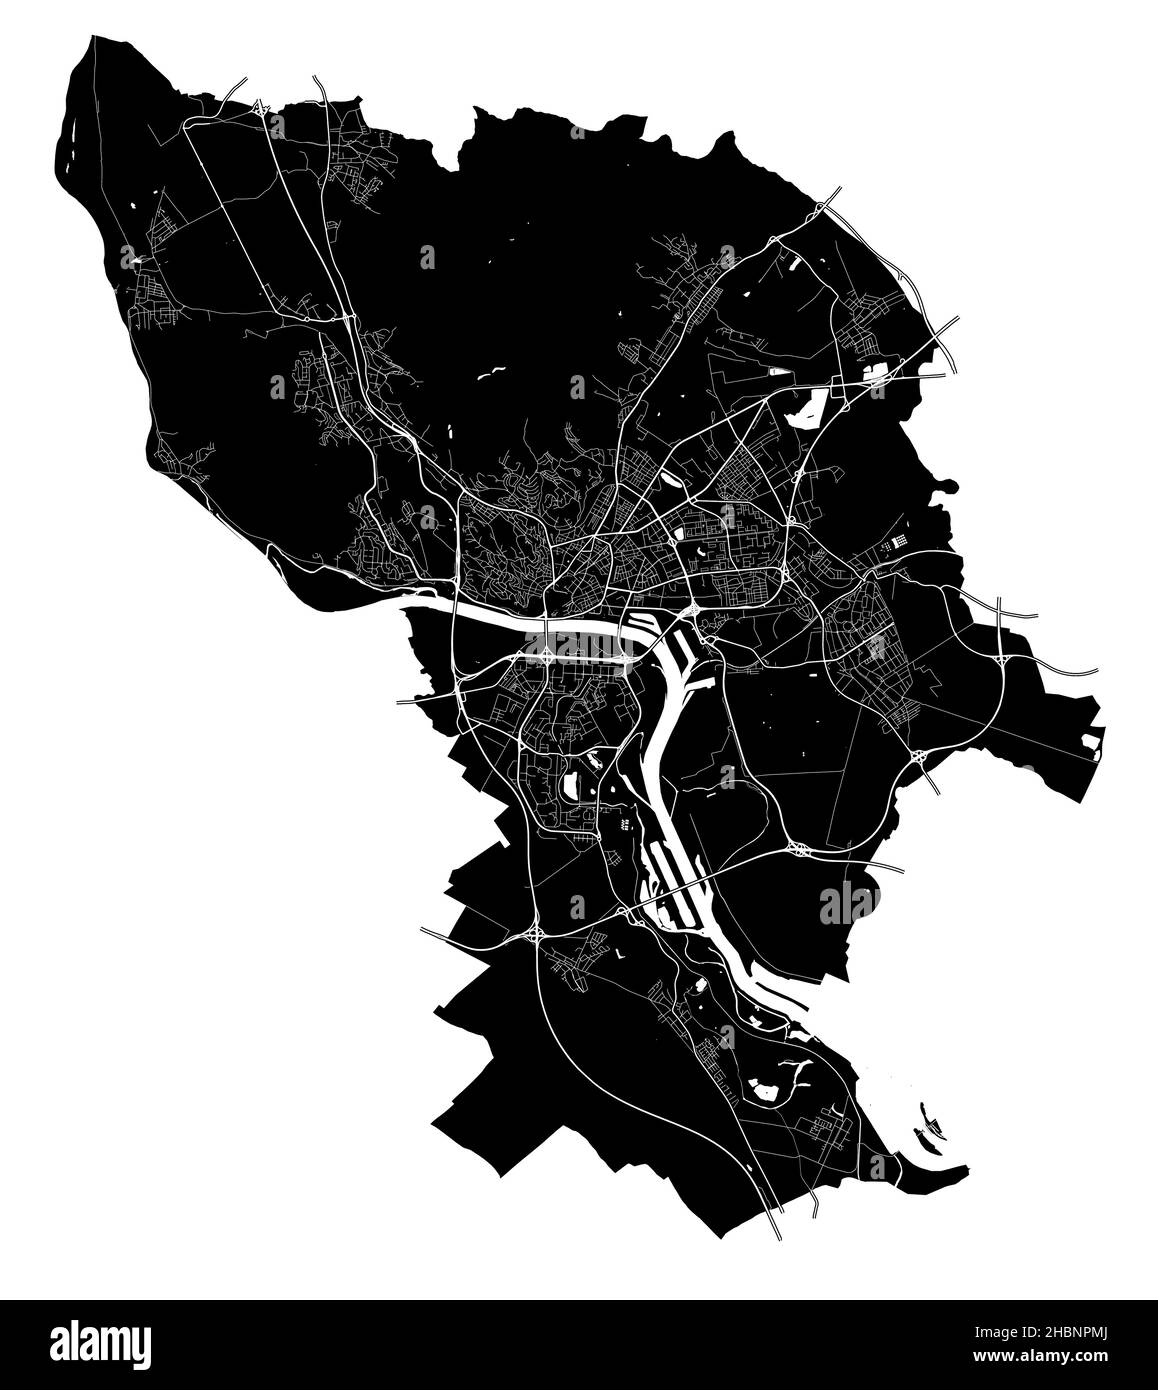 Bratislava, Slovakia, high resolution vector map with city boundaries, and editable paths. The city map was drawn with white areas and lines for main Stock Vector